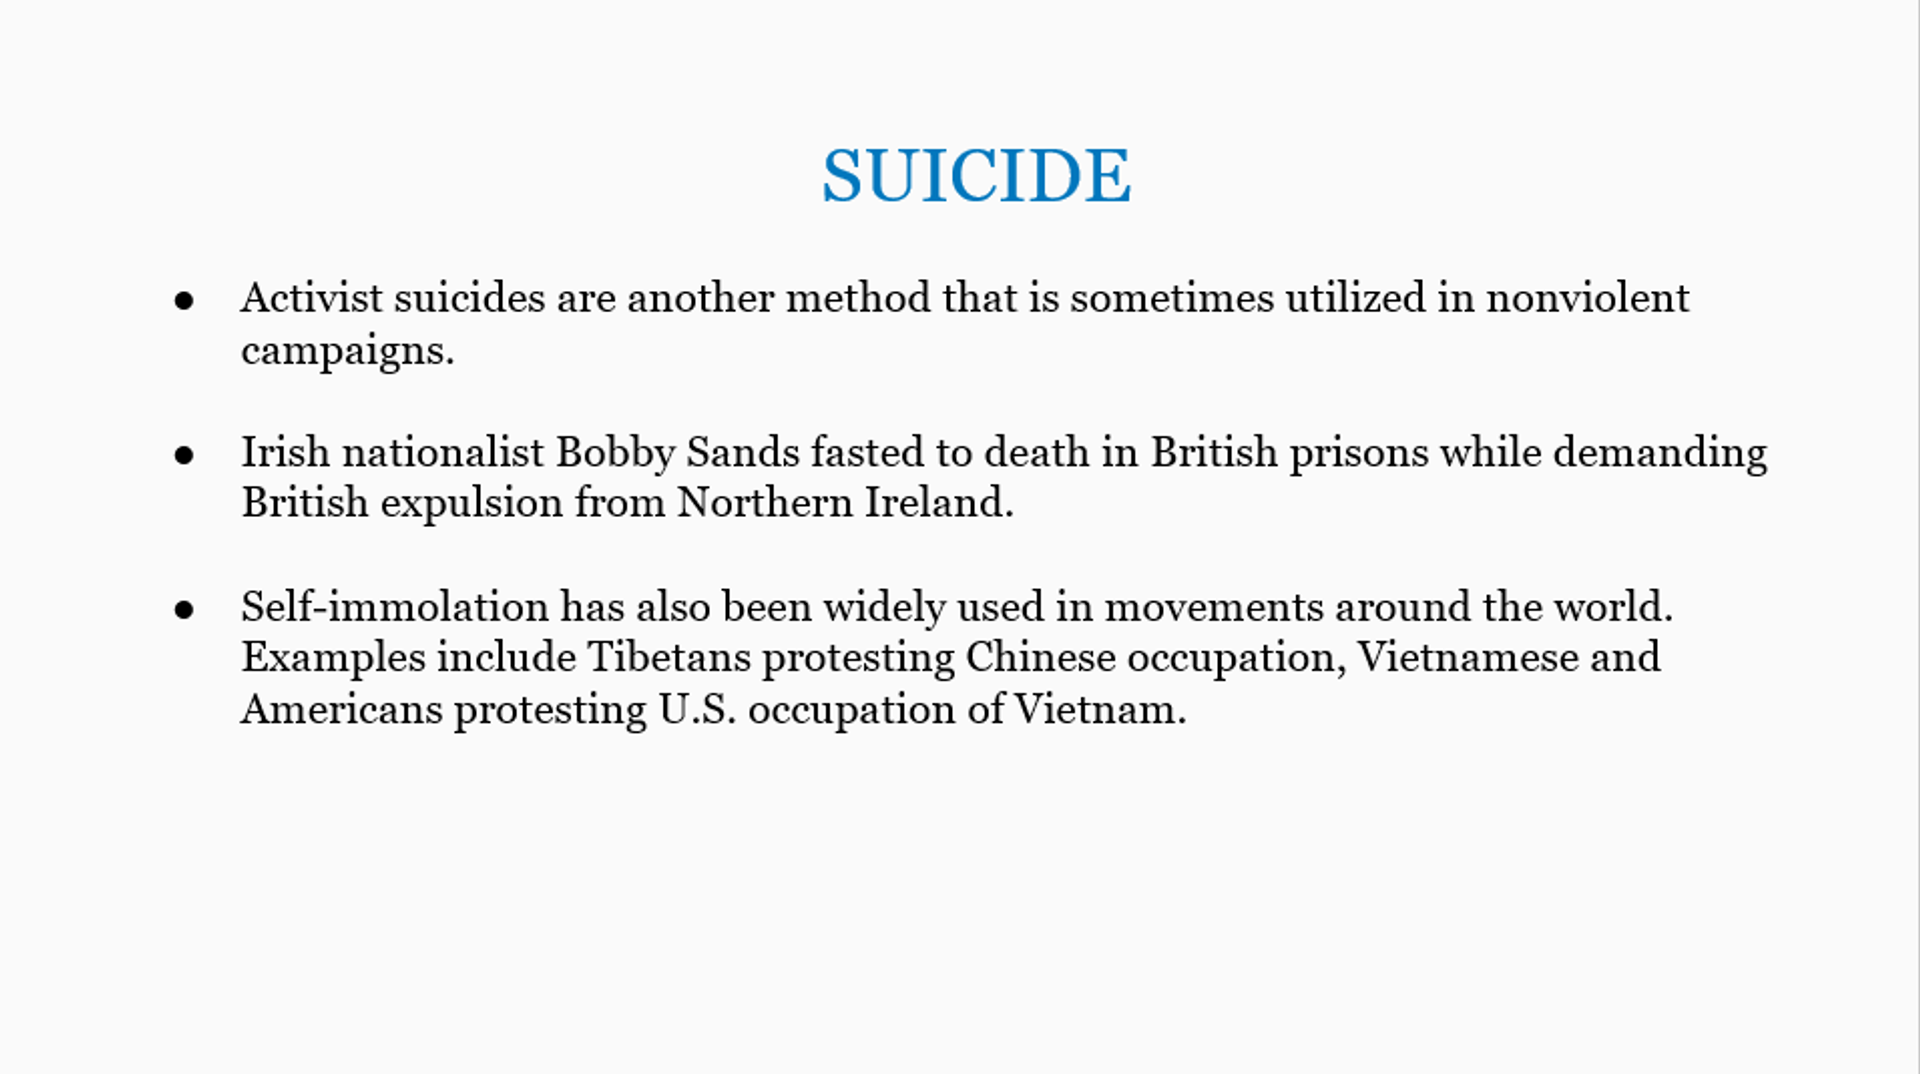 DAI presentation slide on the suicide as another method that is sometimes utilized in nonvivolent campaigns. - Sputnik International, 1920, 19.11.2022